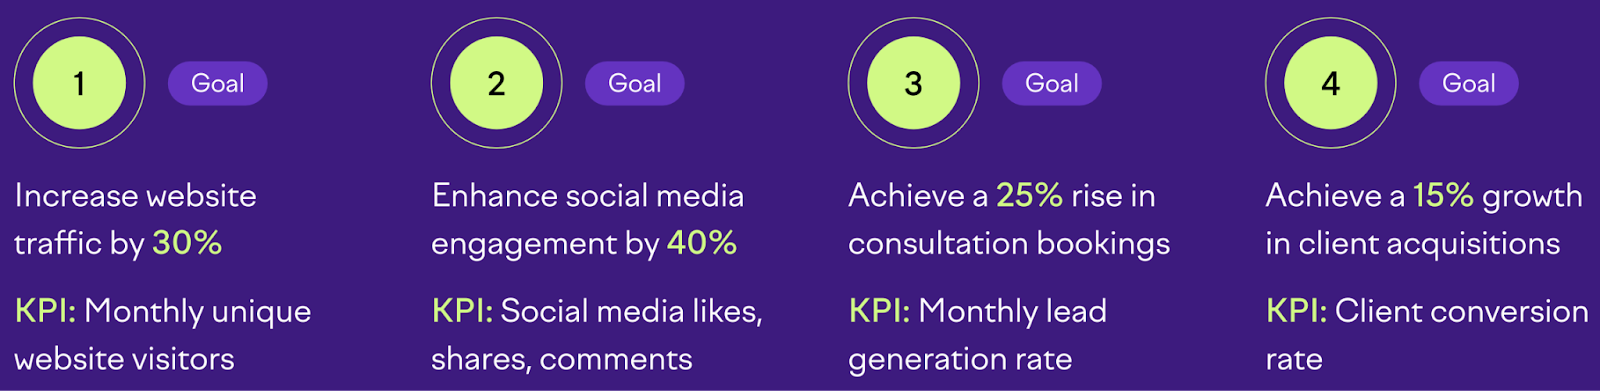 The Q4 marketing goals and KPIs of an example business from the marketing plan template